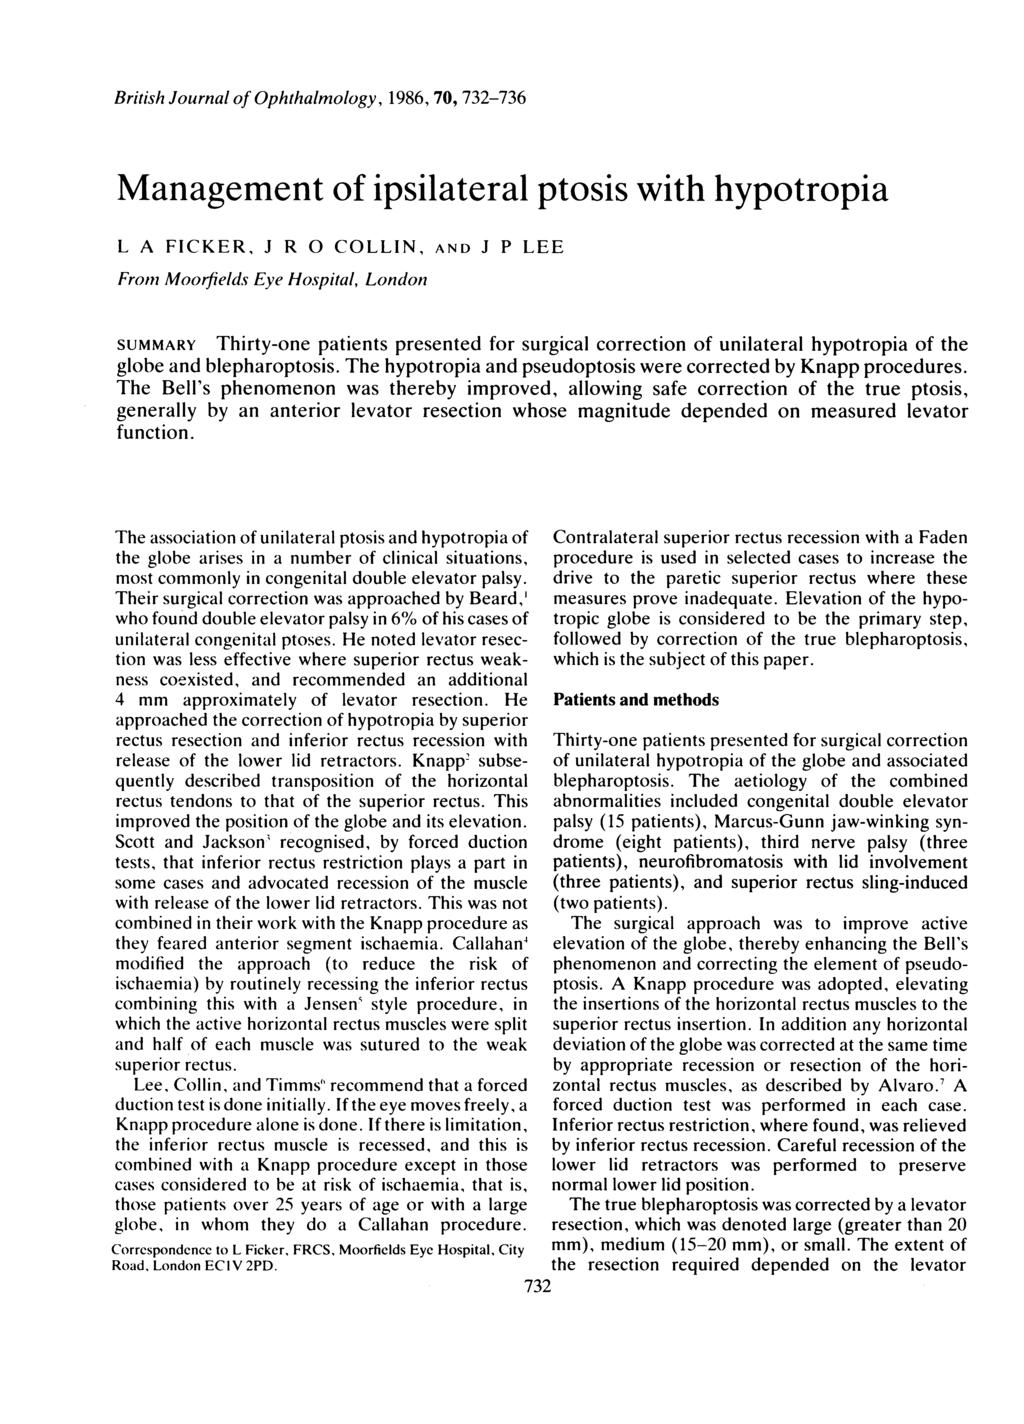 British Journal of Ophthalmology, 1986, 70, 732-736 Management of ipsilateral ptosis with hypotropia L A FICKER, J R 0 COLLIN, AND J P LEE From Moorfields Eye Hospital, London SUMMARY Thirty-one